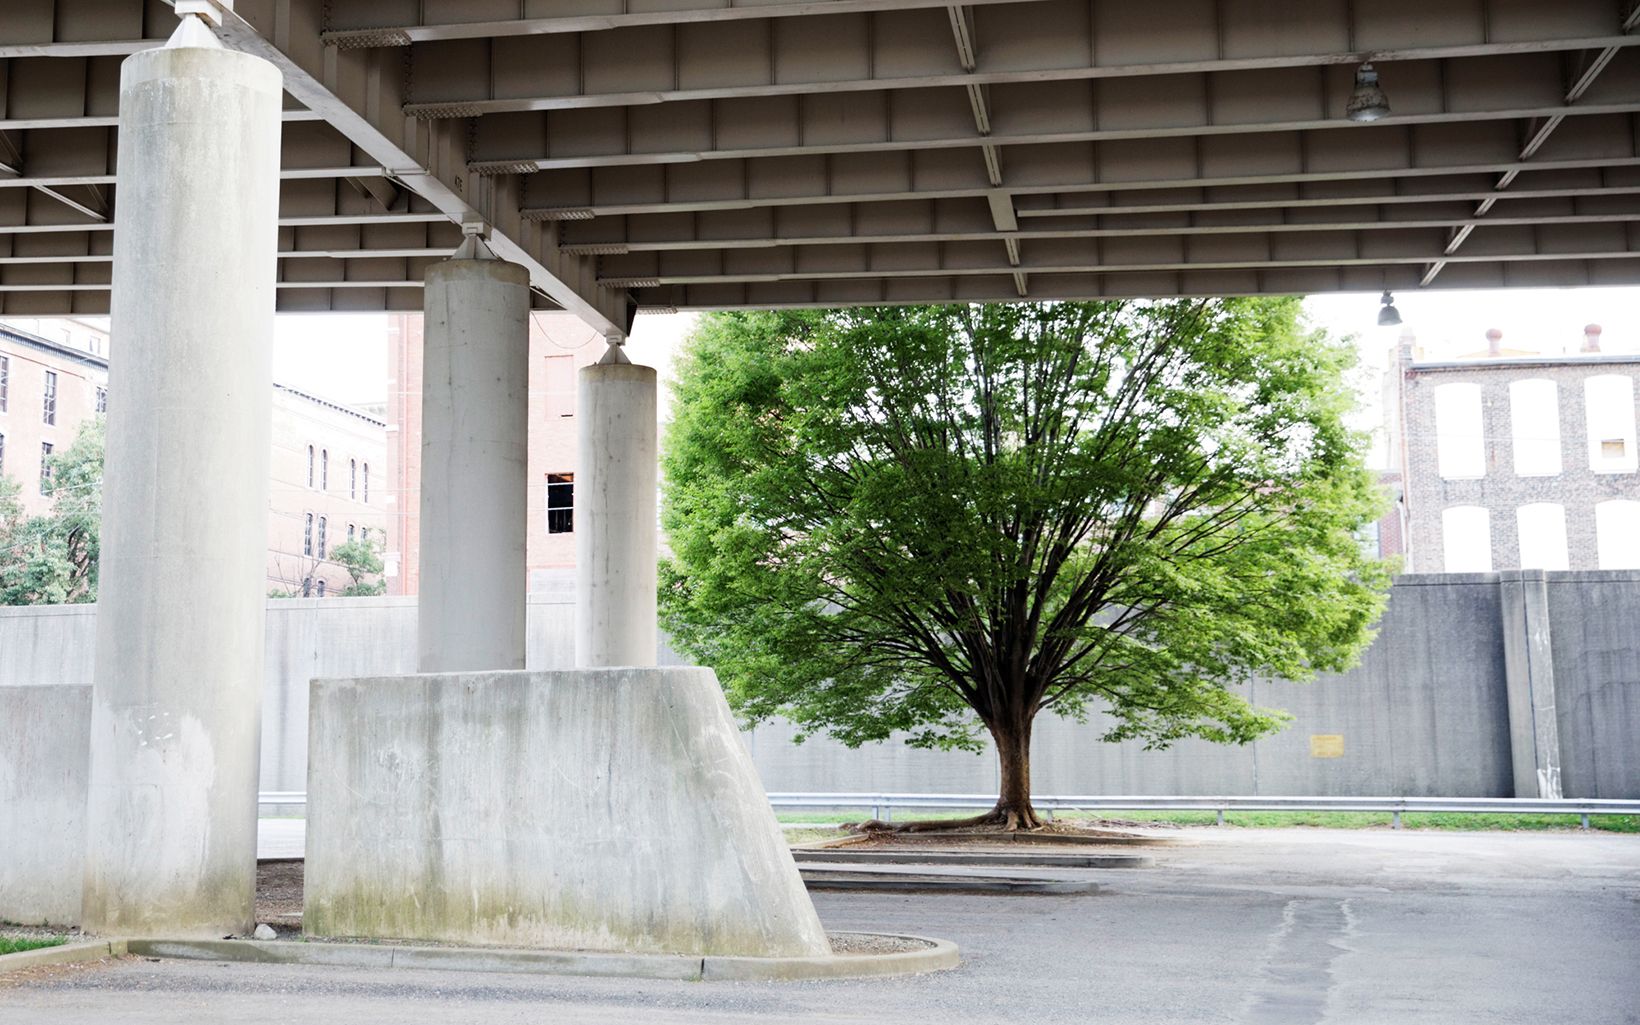 
                
                  Spaghetti Junction, Louisville Trees in parking area under Spaghetti Junction, in Louisville, Kentucky. Small pockets of nature, in the right place, can make a big difference for public health.
                  © Randy Olsen/The Nature Conservancy
                
              